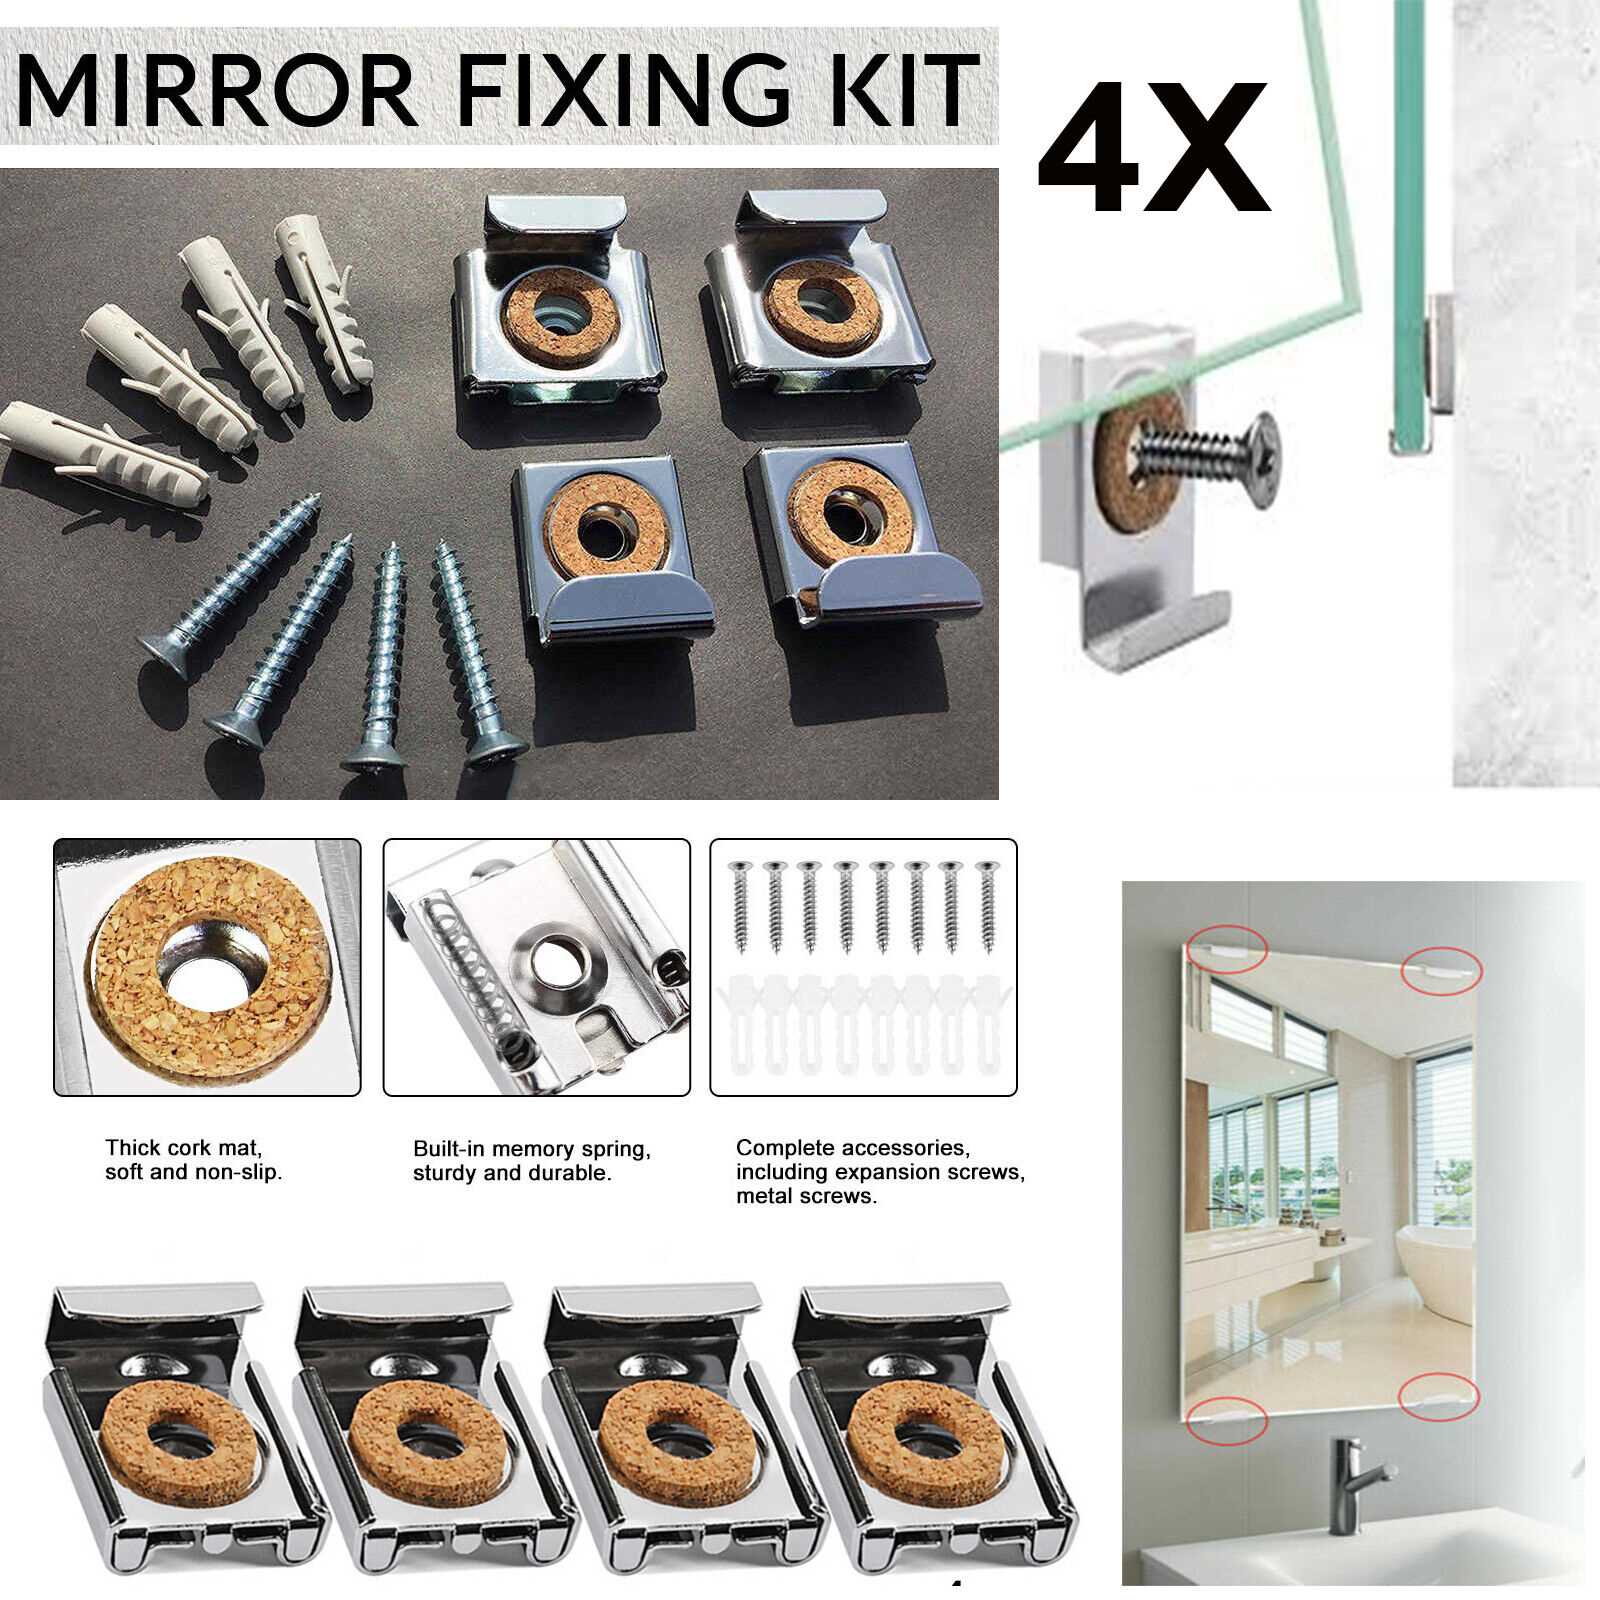 4X FRAMELESS MIRROR WALL BATHROOM HANGING FIXING KIT PICTURE MOUNTING CLIPS